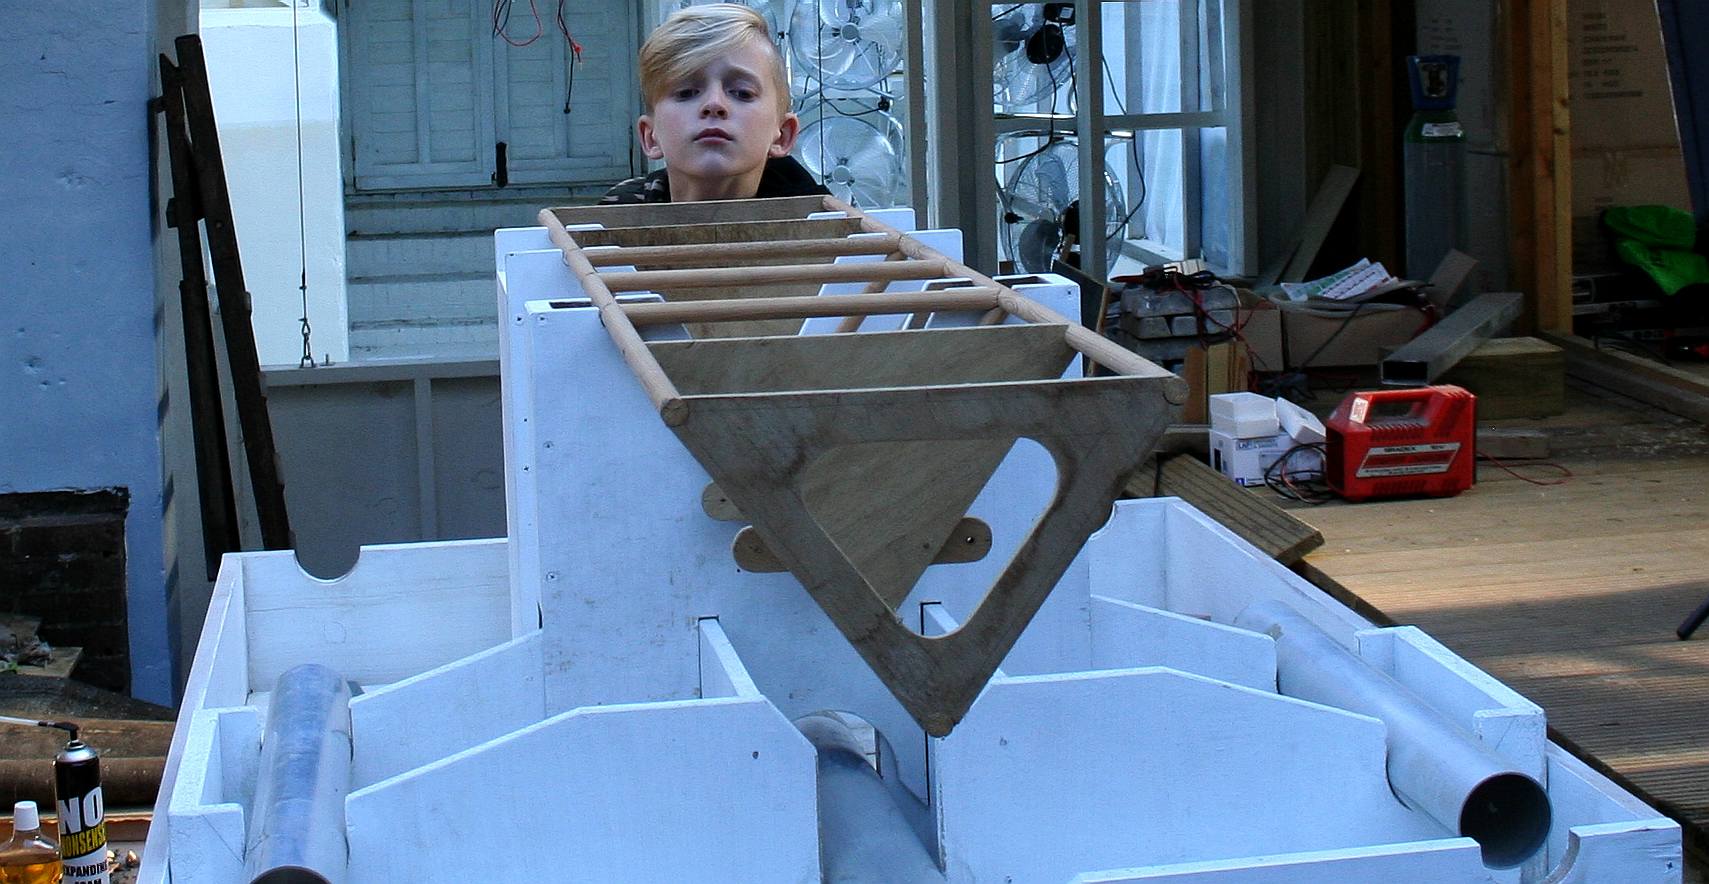 Ryan Dusart inspects a wooden test frame for the Elizabeth Swann